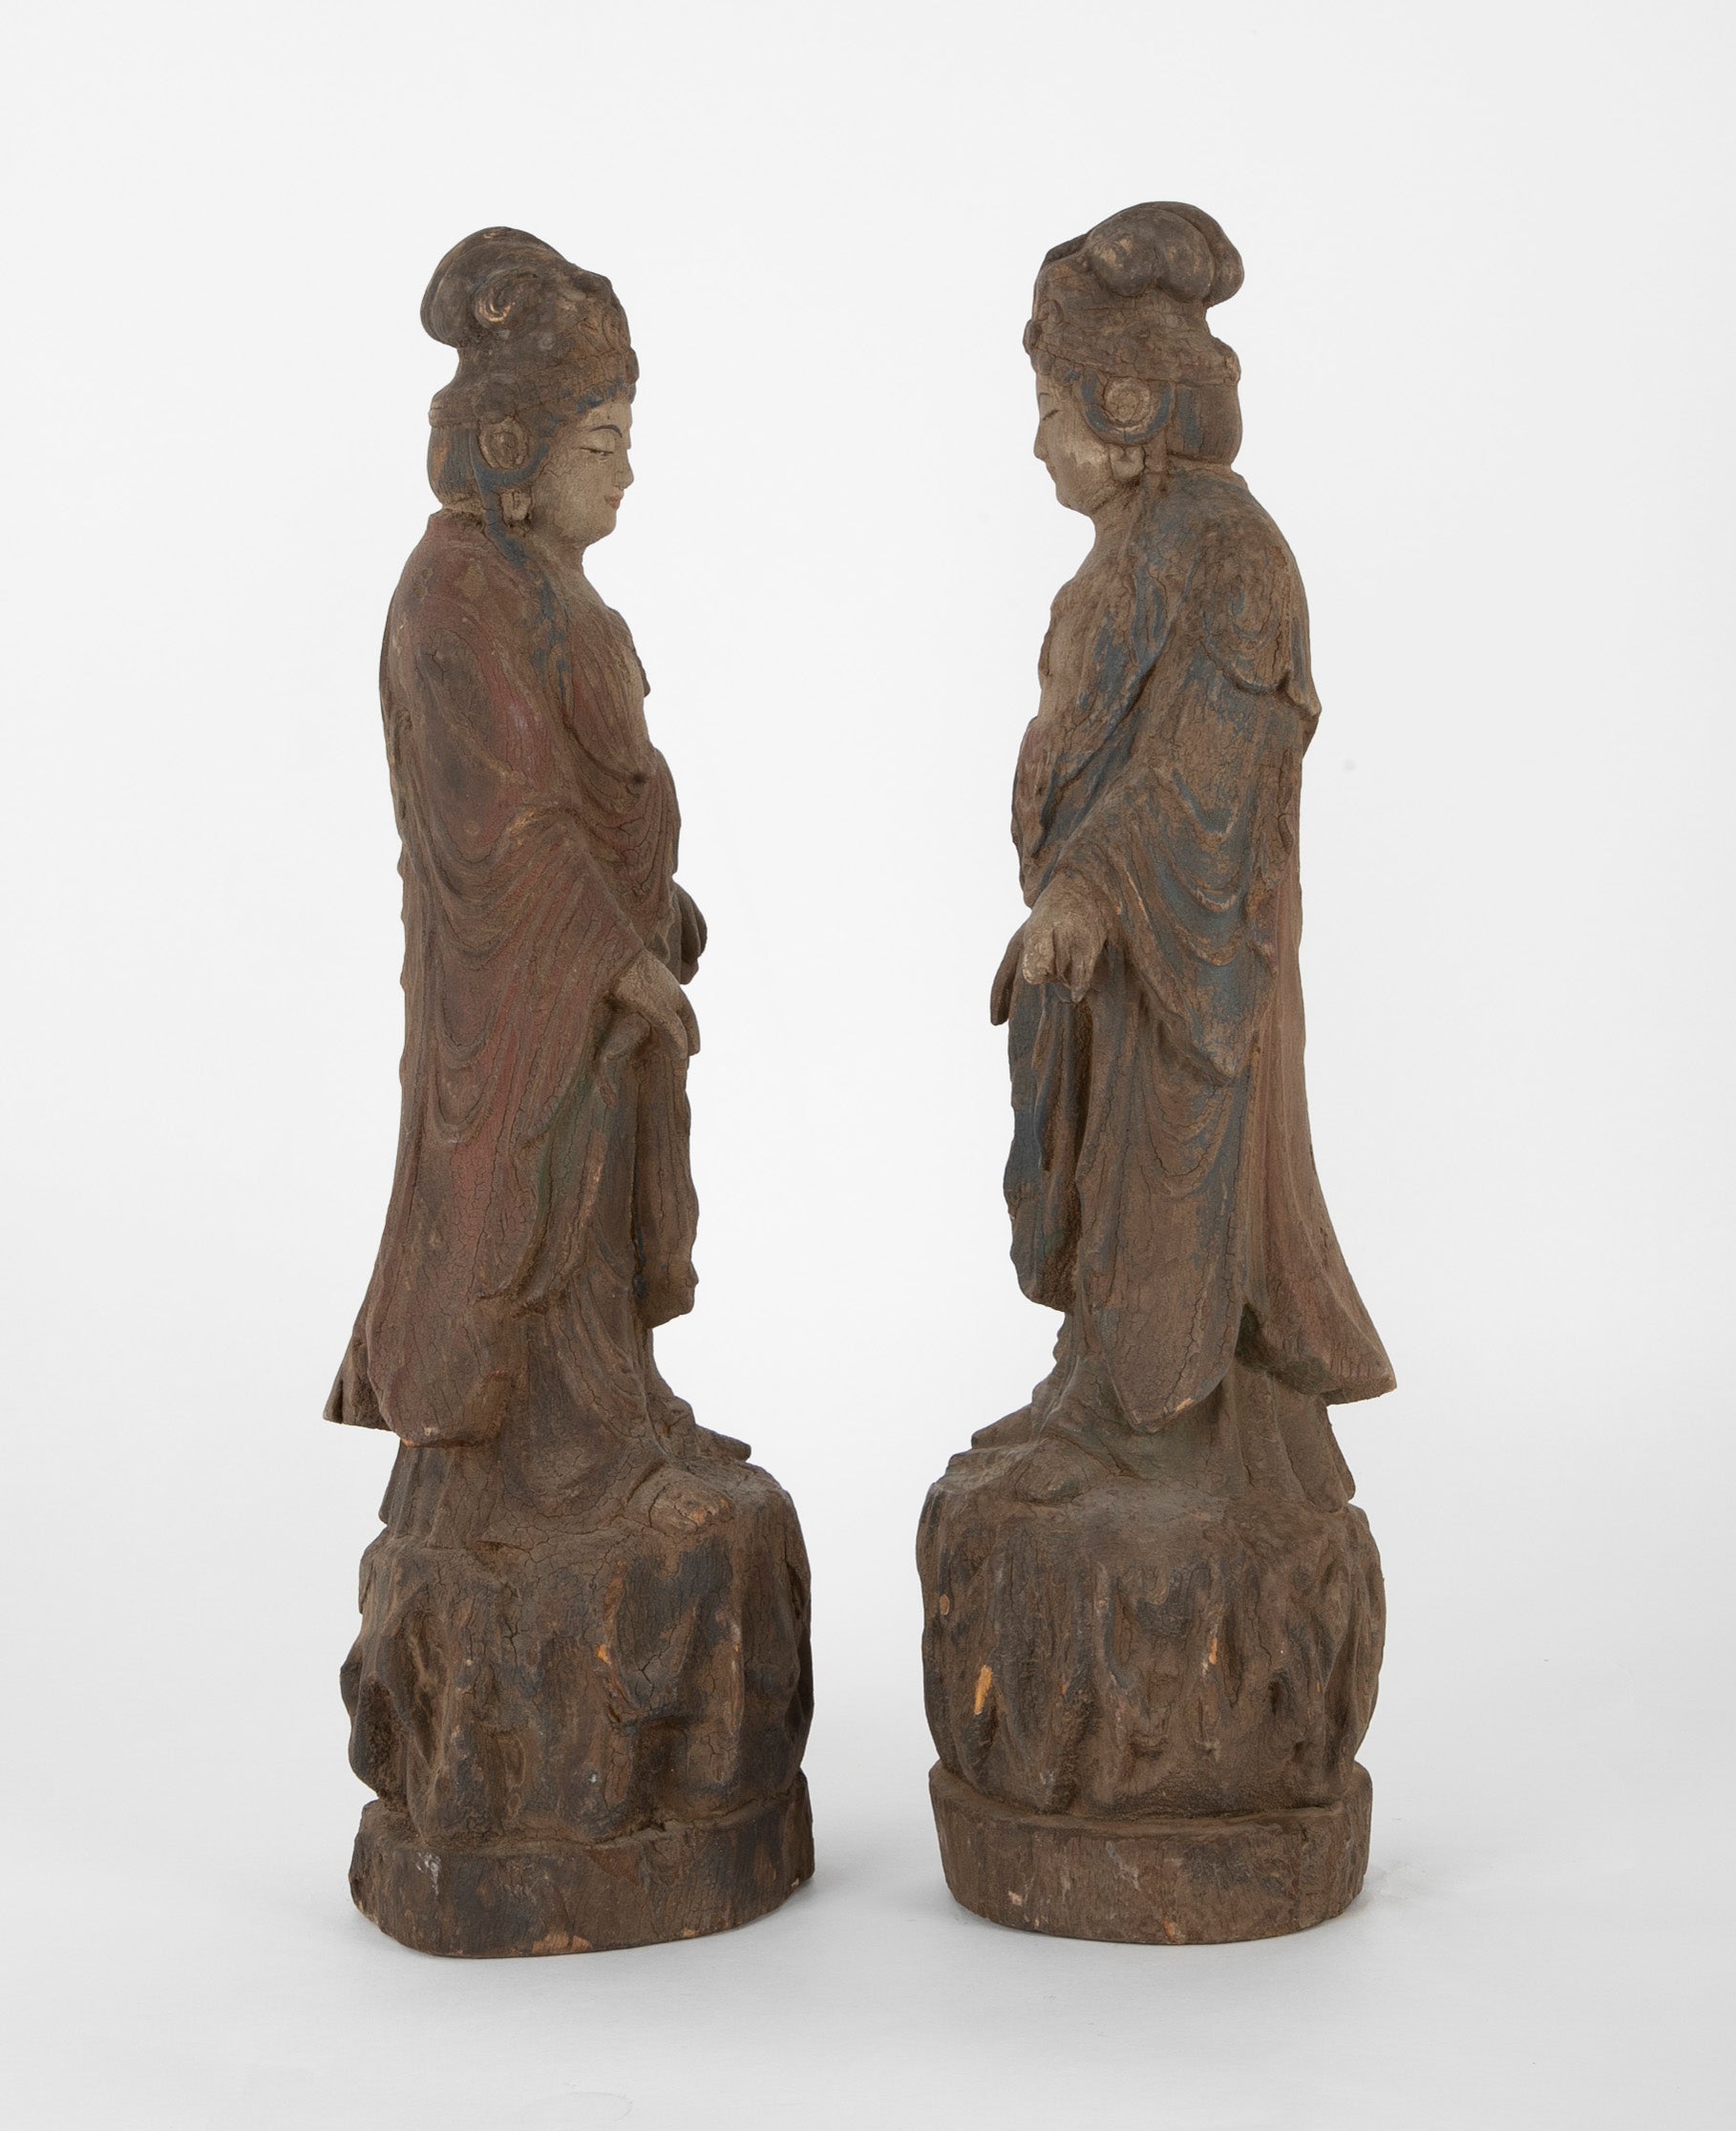 A Pair of Mid 19th Century Chinese Wood Carved Guanyins